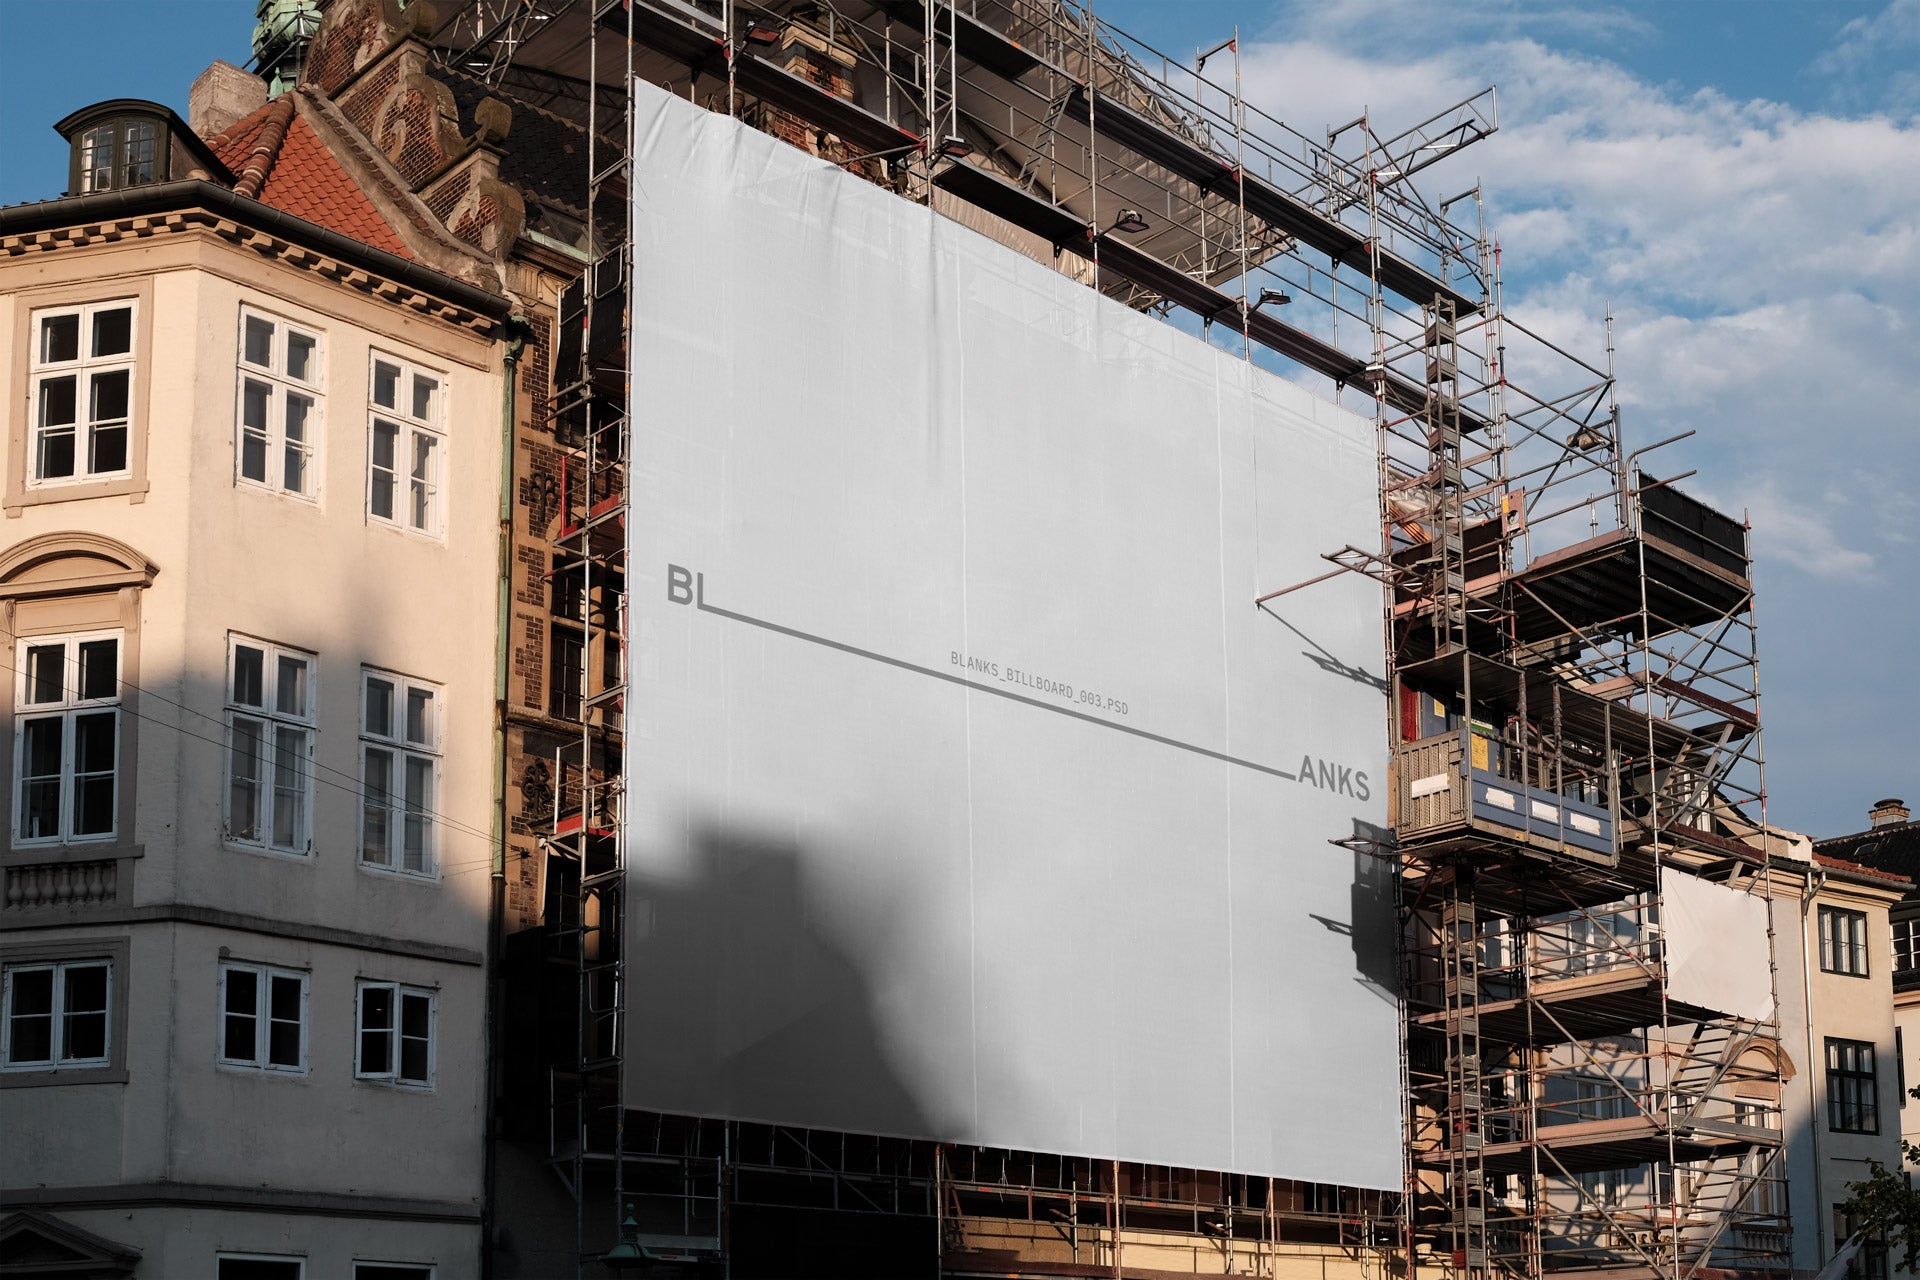 Outdoor Photoshop mockup template of a billboard